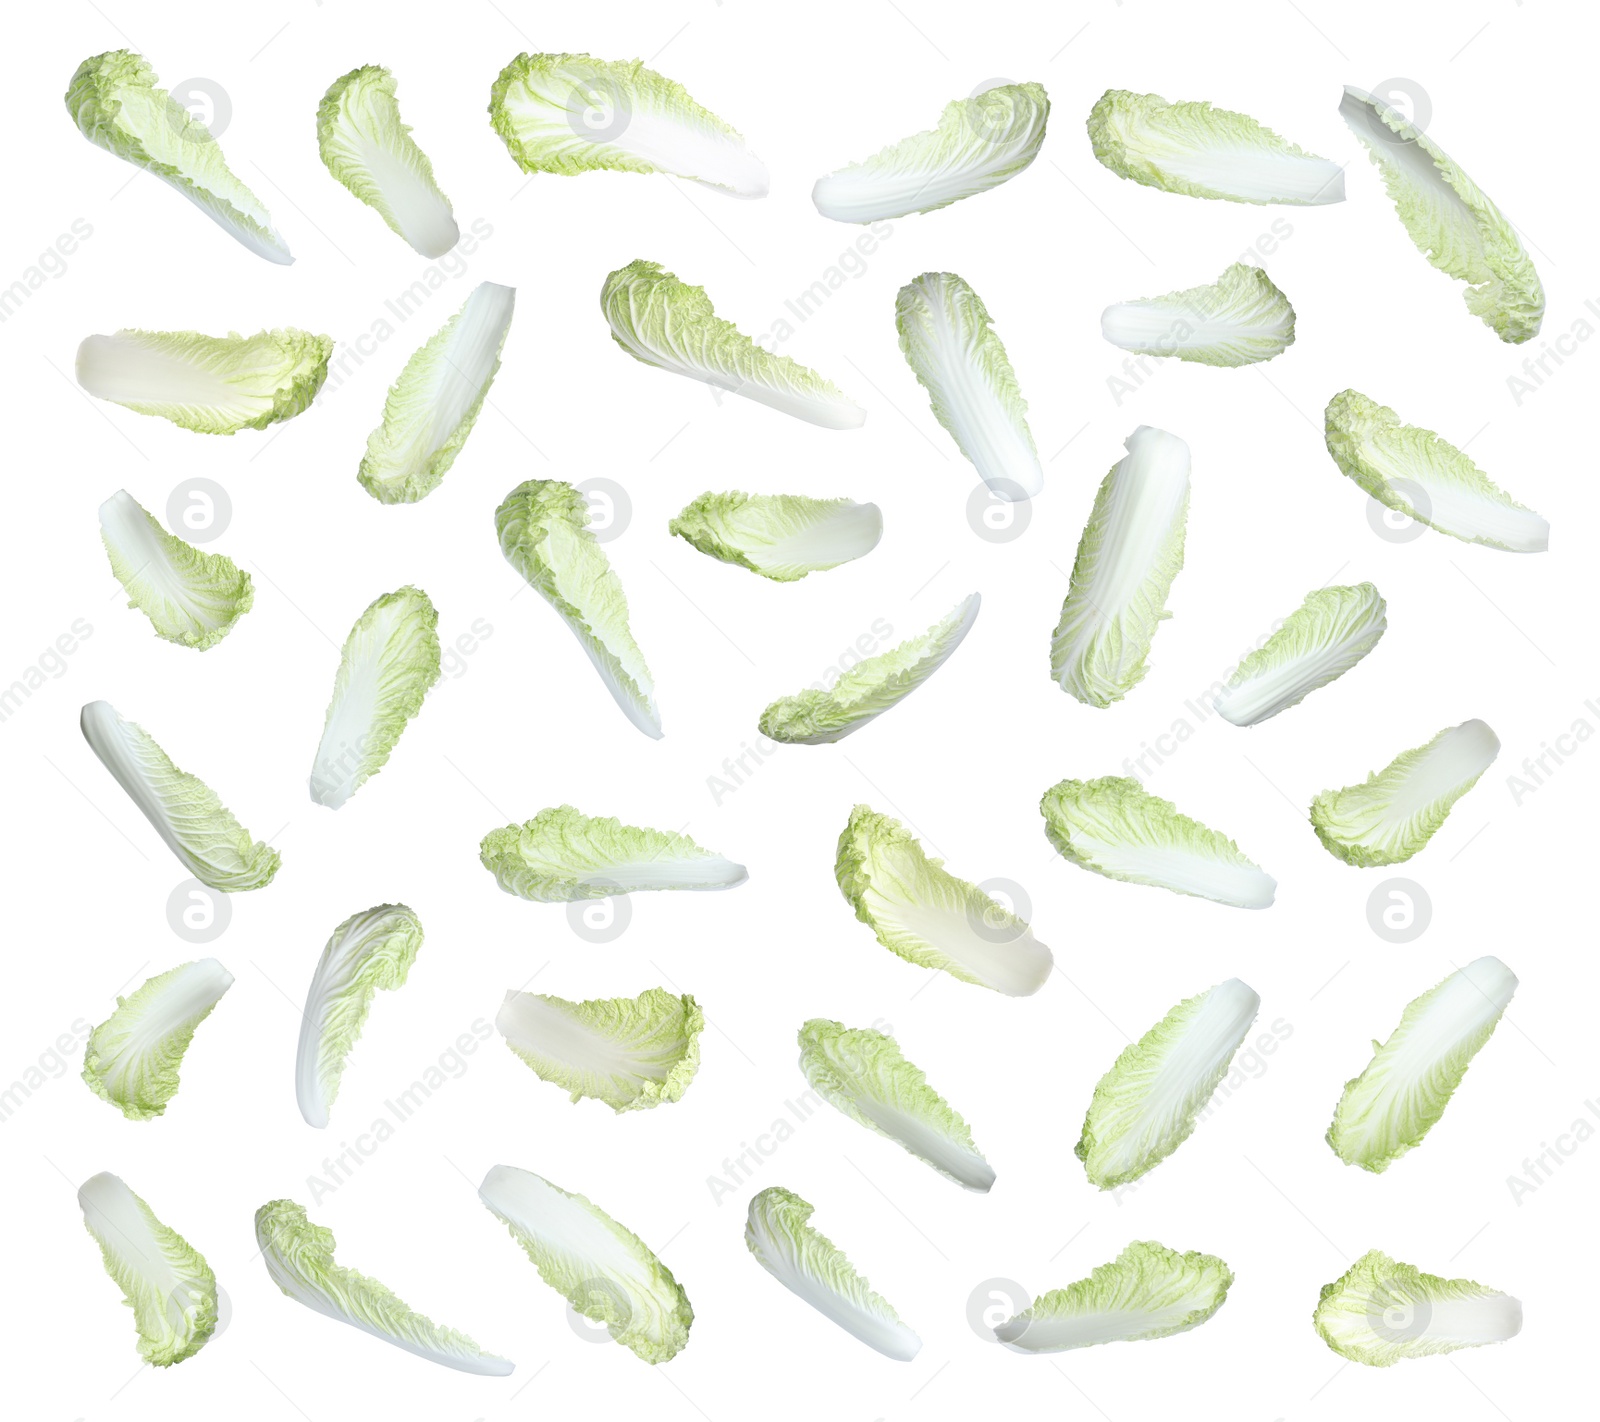 Image of Set with fresh leaves of napa cabbage on white background